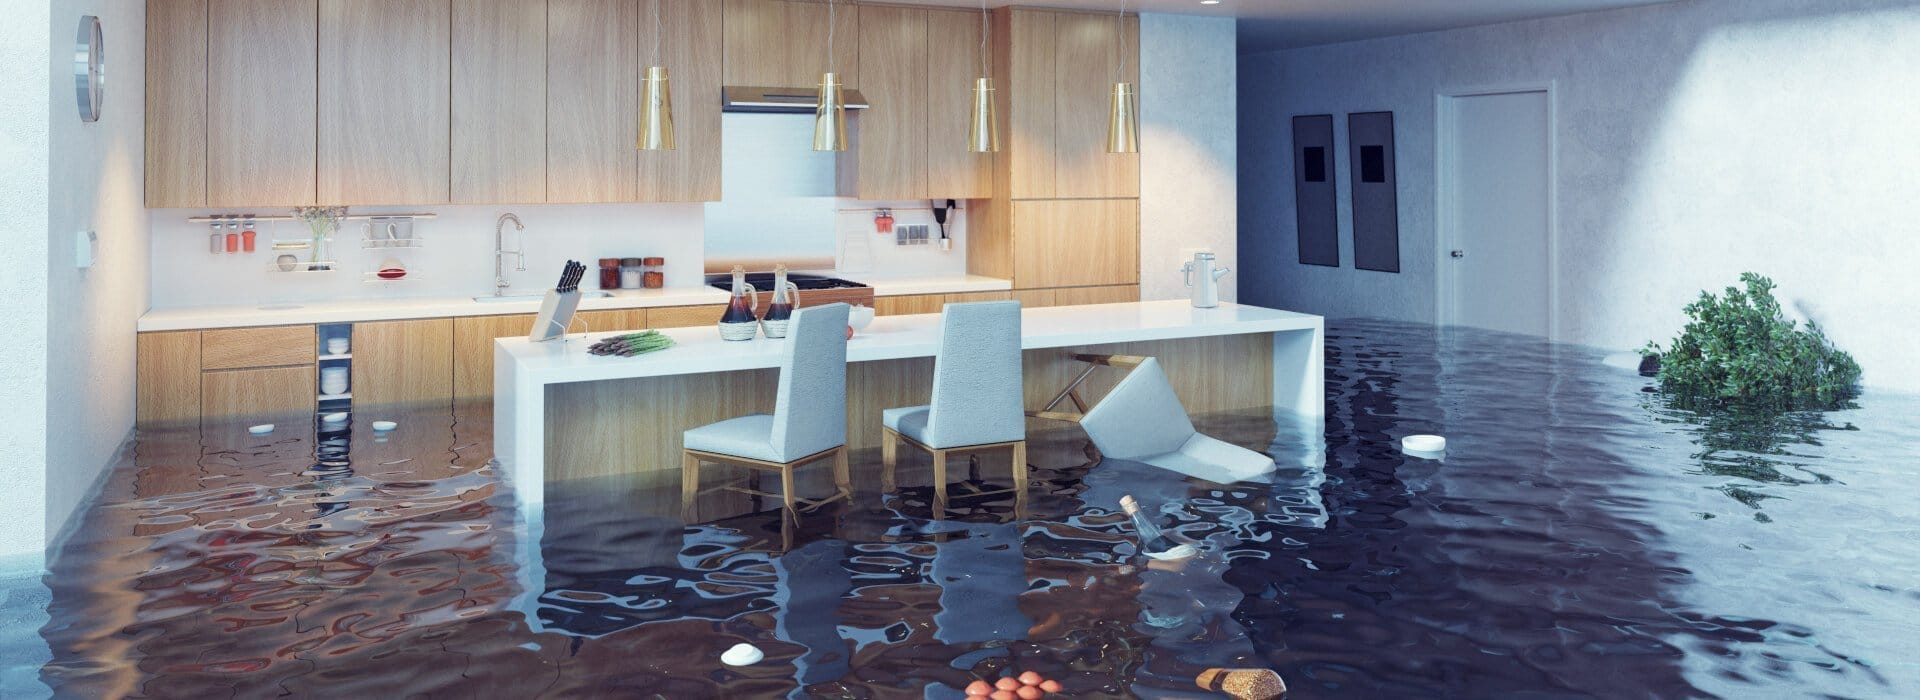 Flooded Kitchen - Sunshine Coast Plumbing and Gas Experts